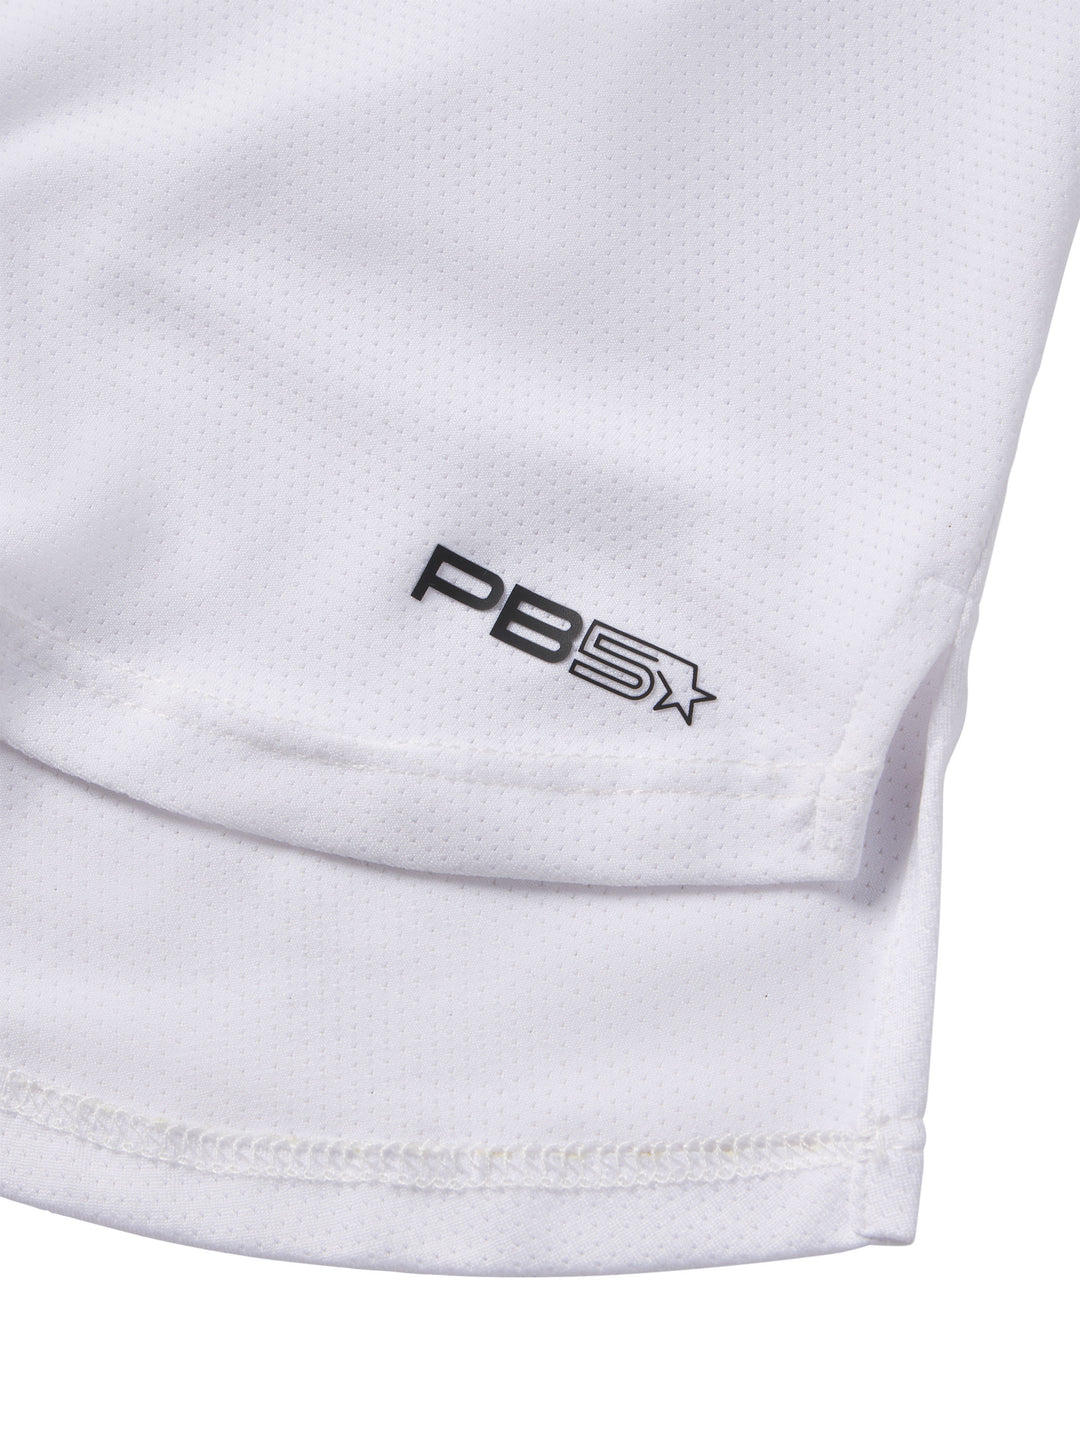 Close-up of the PB5Star logo on a white Cropped Racer Back Tank top highlighting the mesh fabric texture.